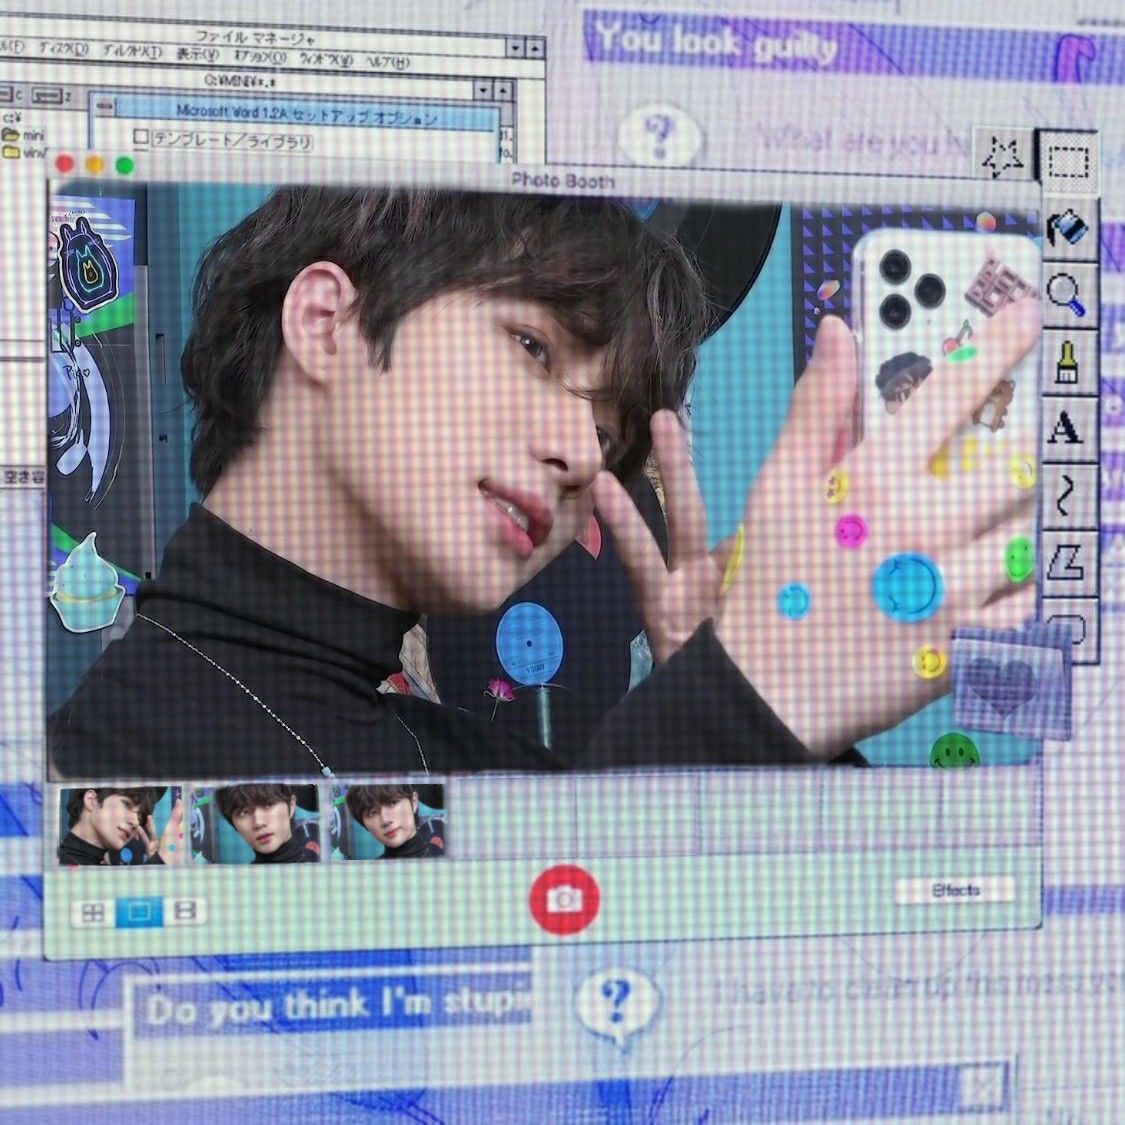 A photo of a K-pop star on a computer screen - Webcore